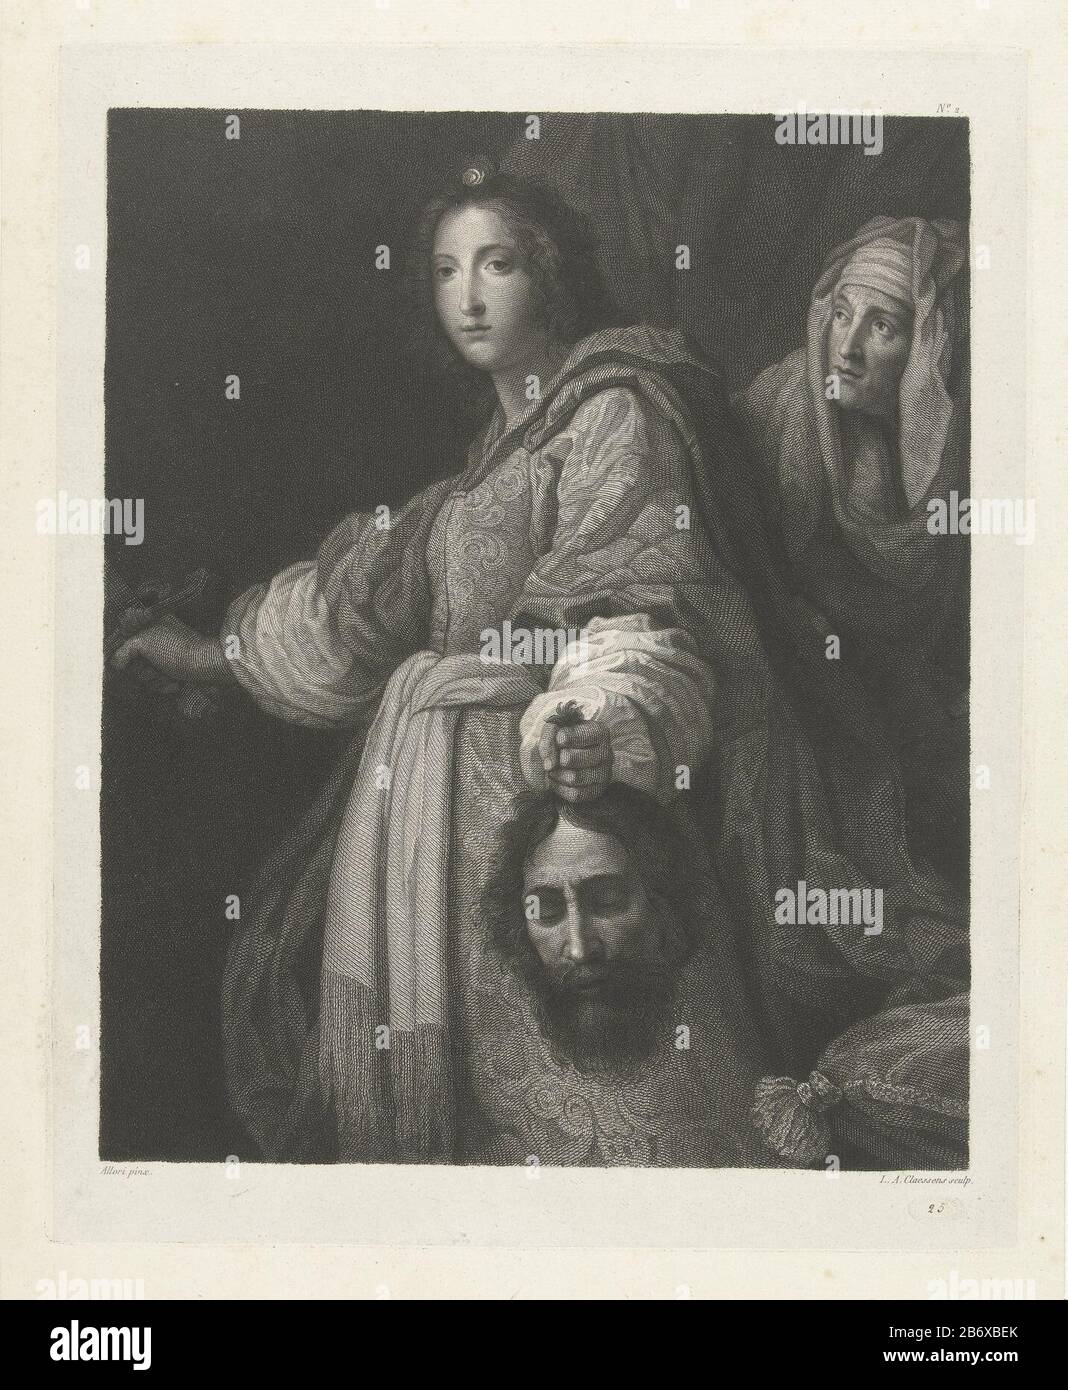 Judith met het hoofd van Holofernes Judith with the Head of Holofernes Object Type : print Serial number: 2 / Item number: RP-P-1888-A-12761Catalogusreferentie: Wurzbach 3Opmerking: 1 (2) based on the collection Rijksmuseum Amsterdam Inscriptions / Marks: collector's mark , verso, stamped: Lugt 2228blindstempel, recto, embossed: oval stamp numeral 25 in handwriting numbered by the artist, see Wurzbach. Manufacturer : printmaker: Lambertus Antonius Claessens (listed property) to painting: Cristofano Allori (listed property) Place Manufacture: Paris Dating: ca. 1808 - 1834 Physical characteristi Stock Photo